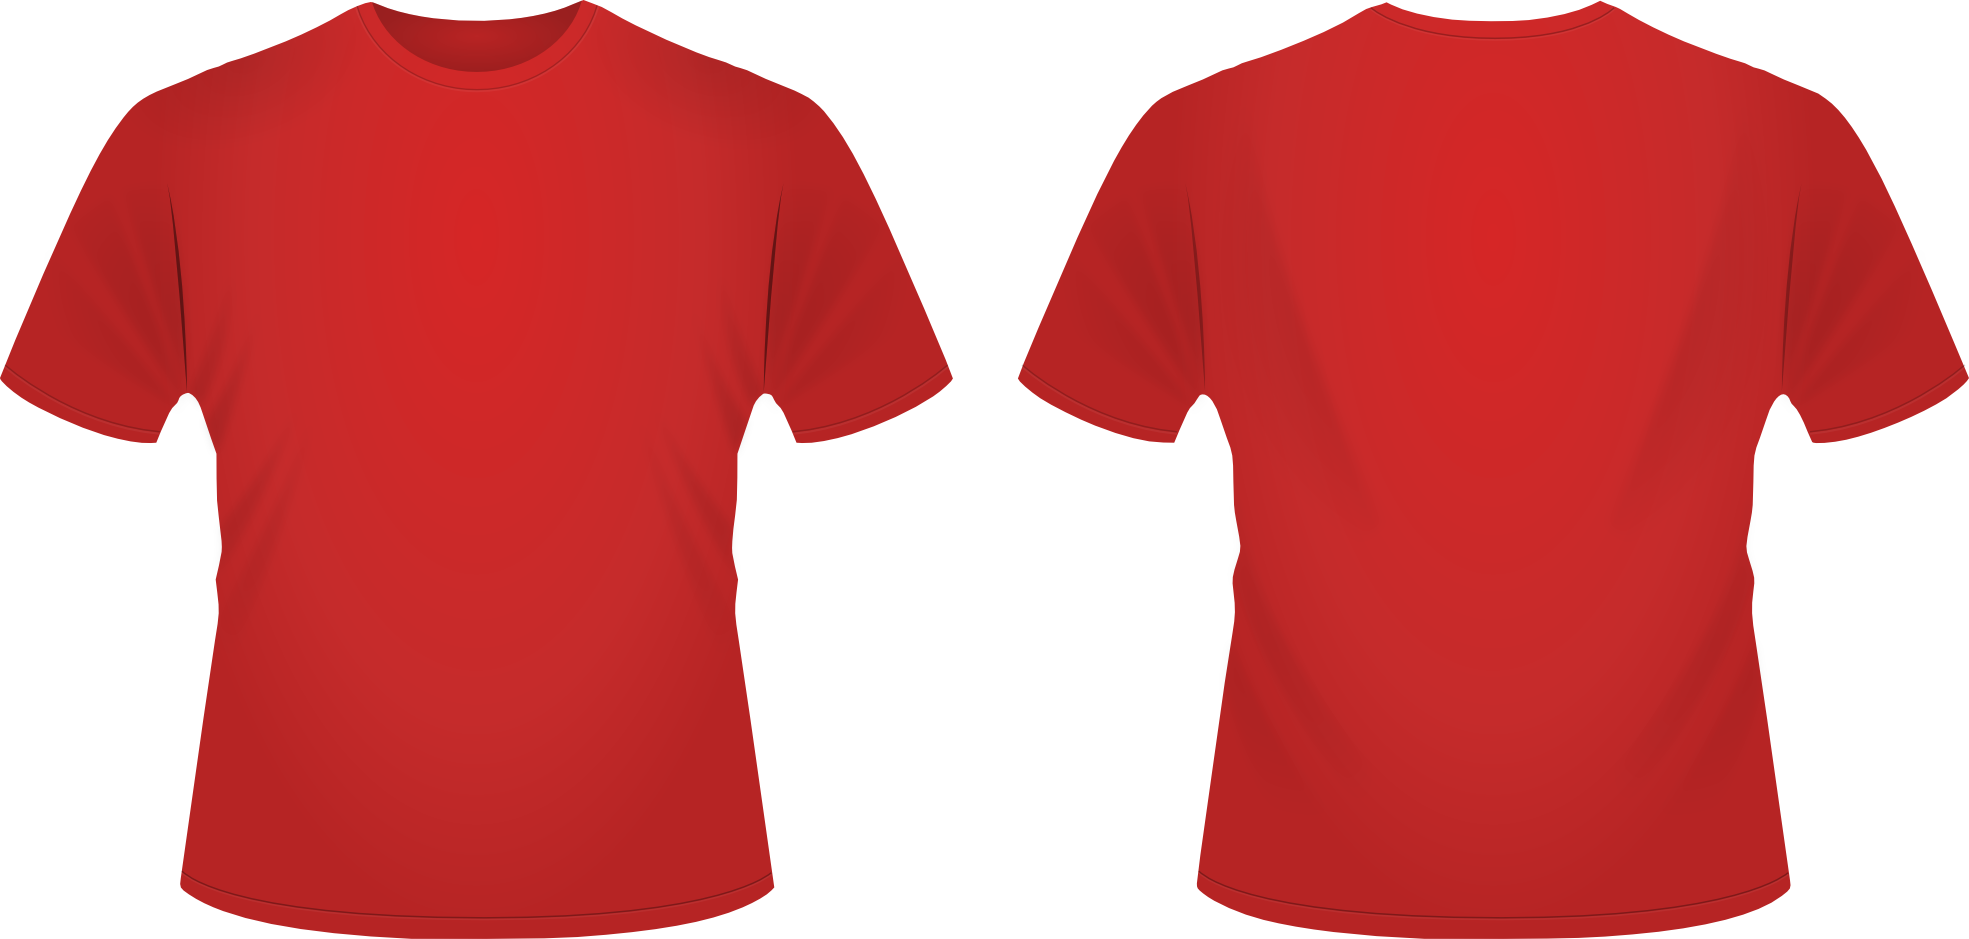 free-red-t-shirt-cliparts-download-free-red-t-shirt-cliparts-png